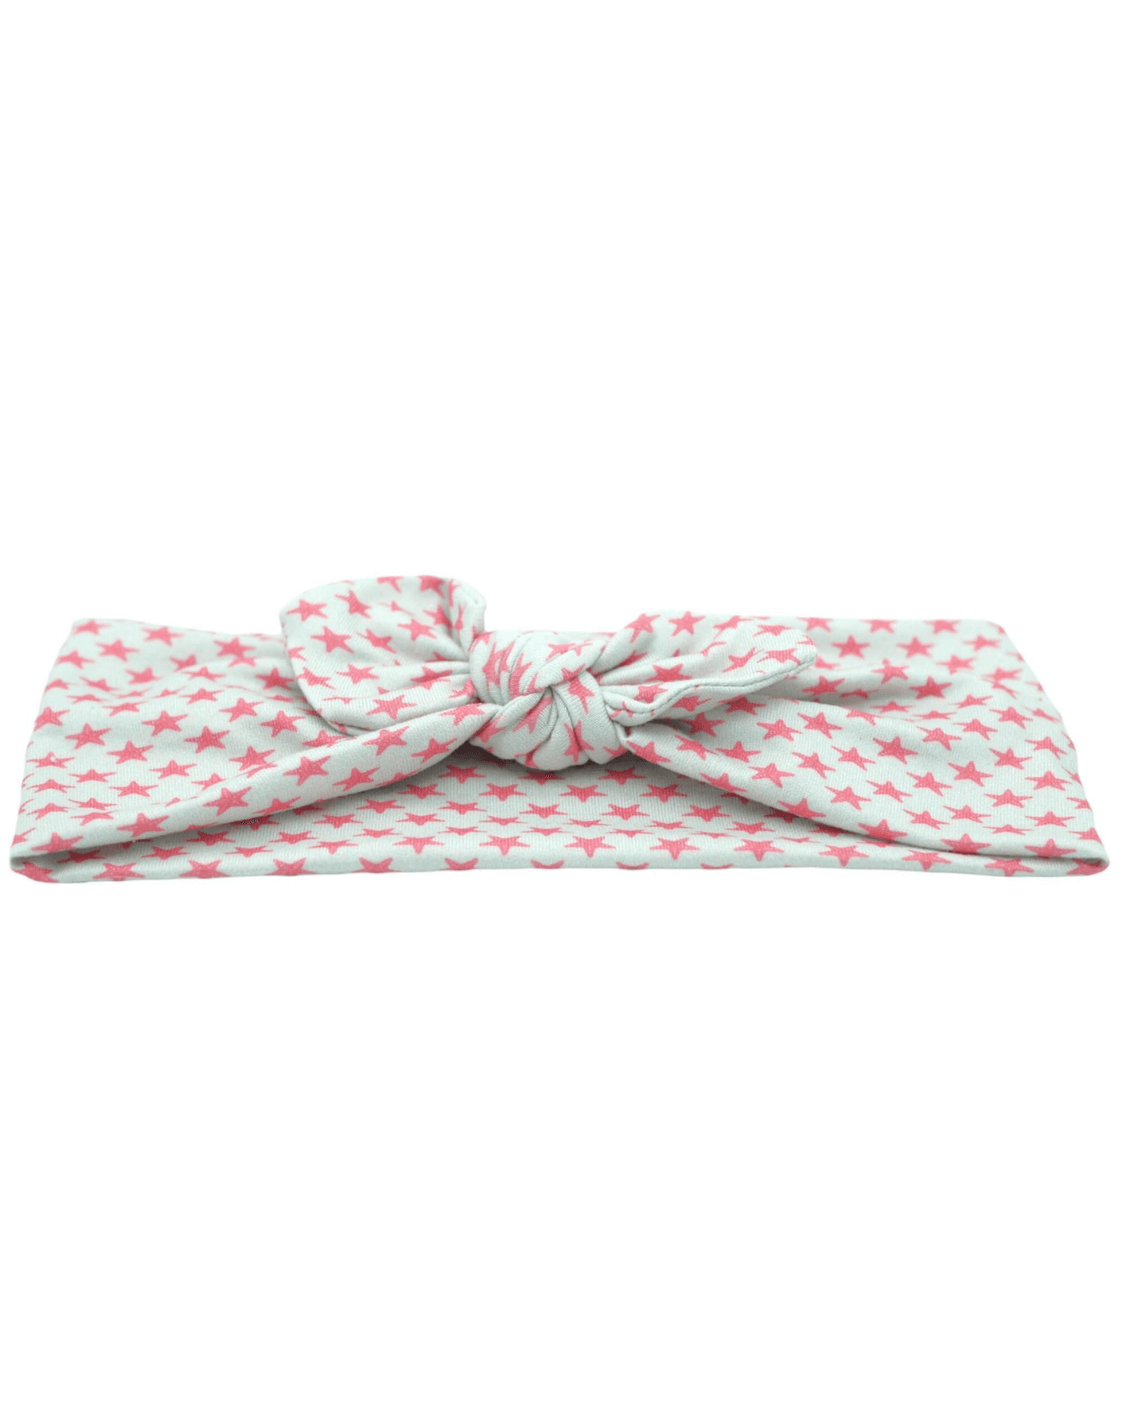 Starfish top knot headband for little girls from By Bella Boutique.